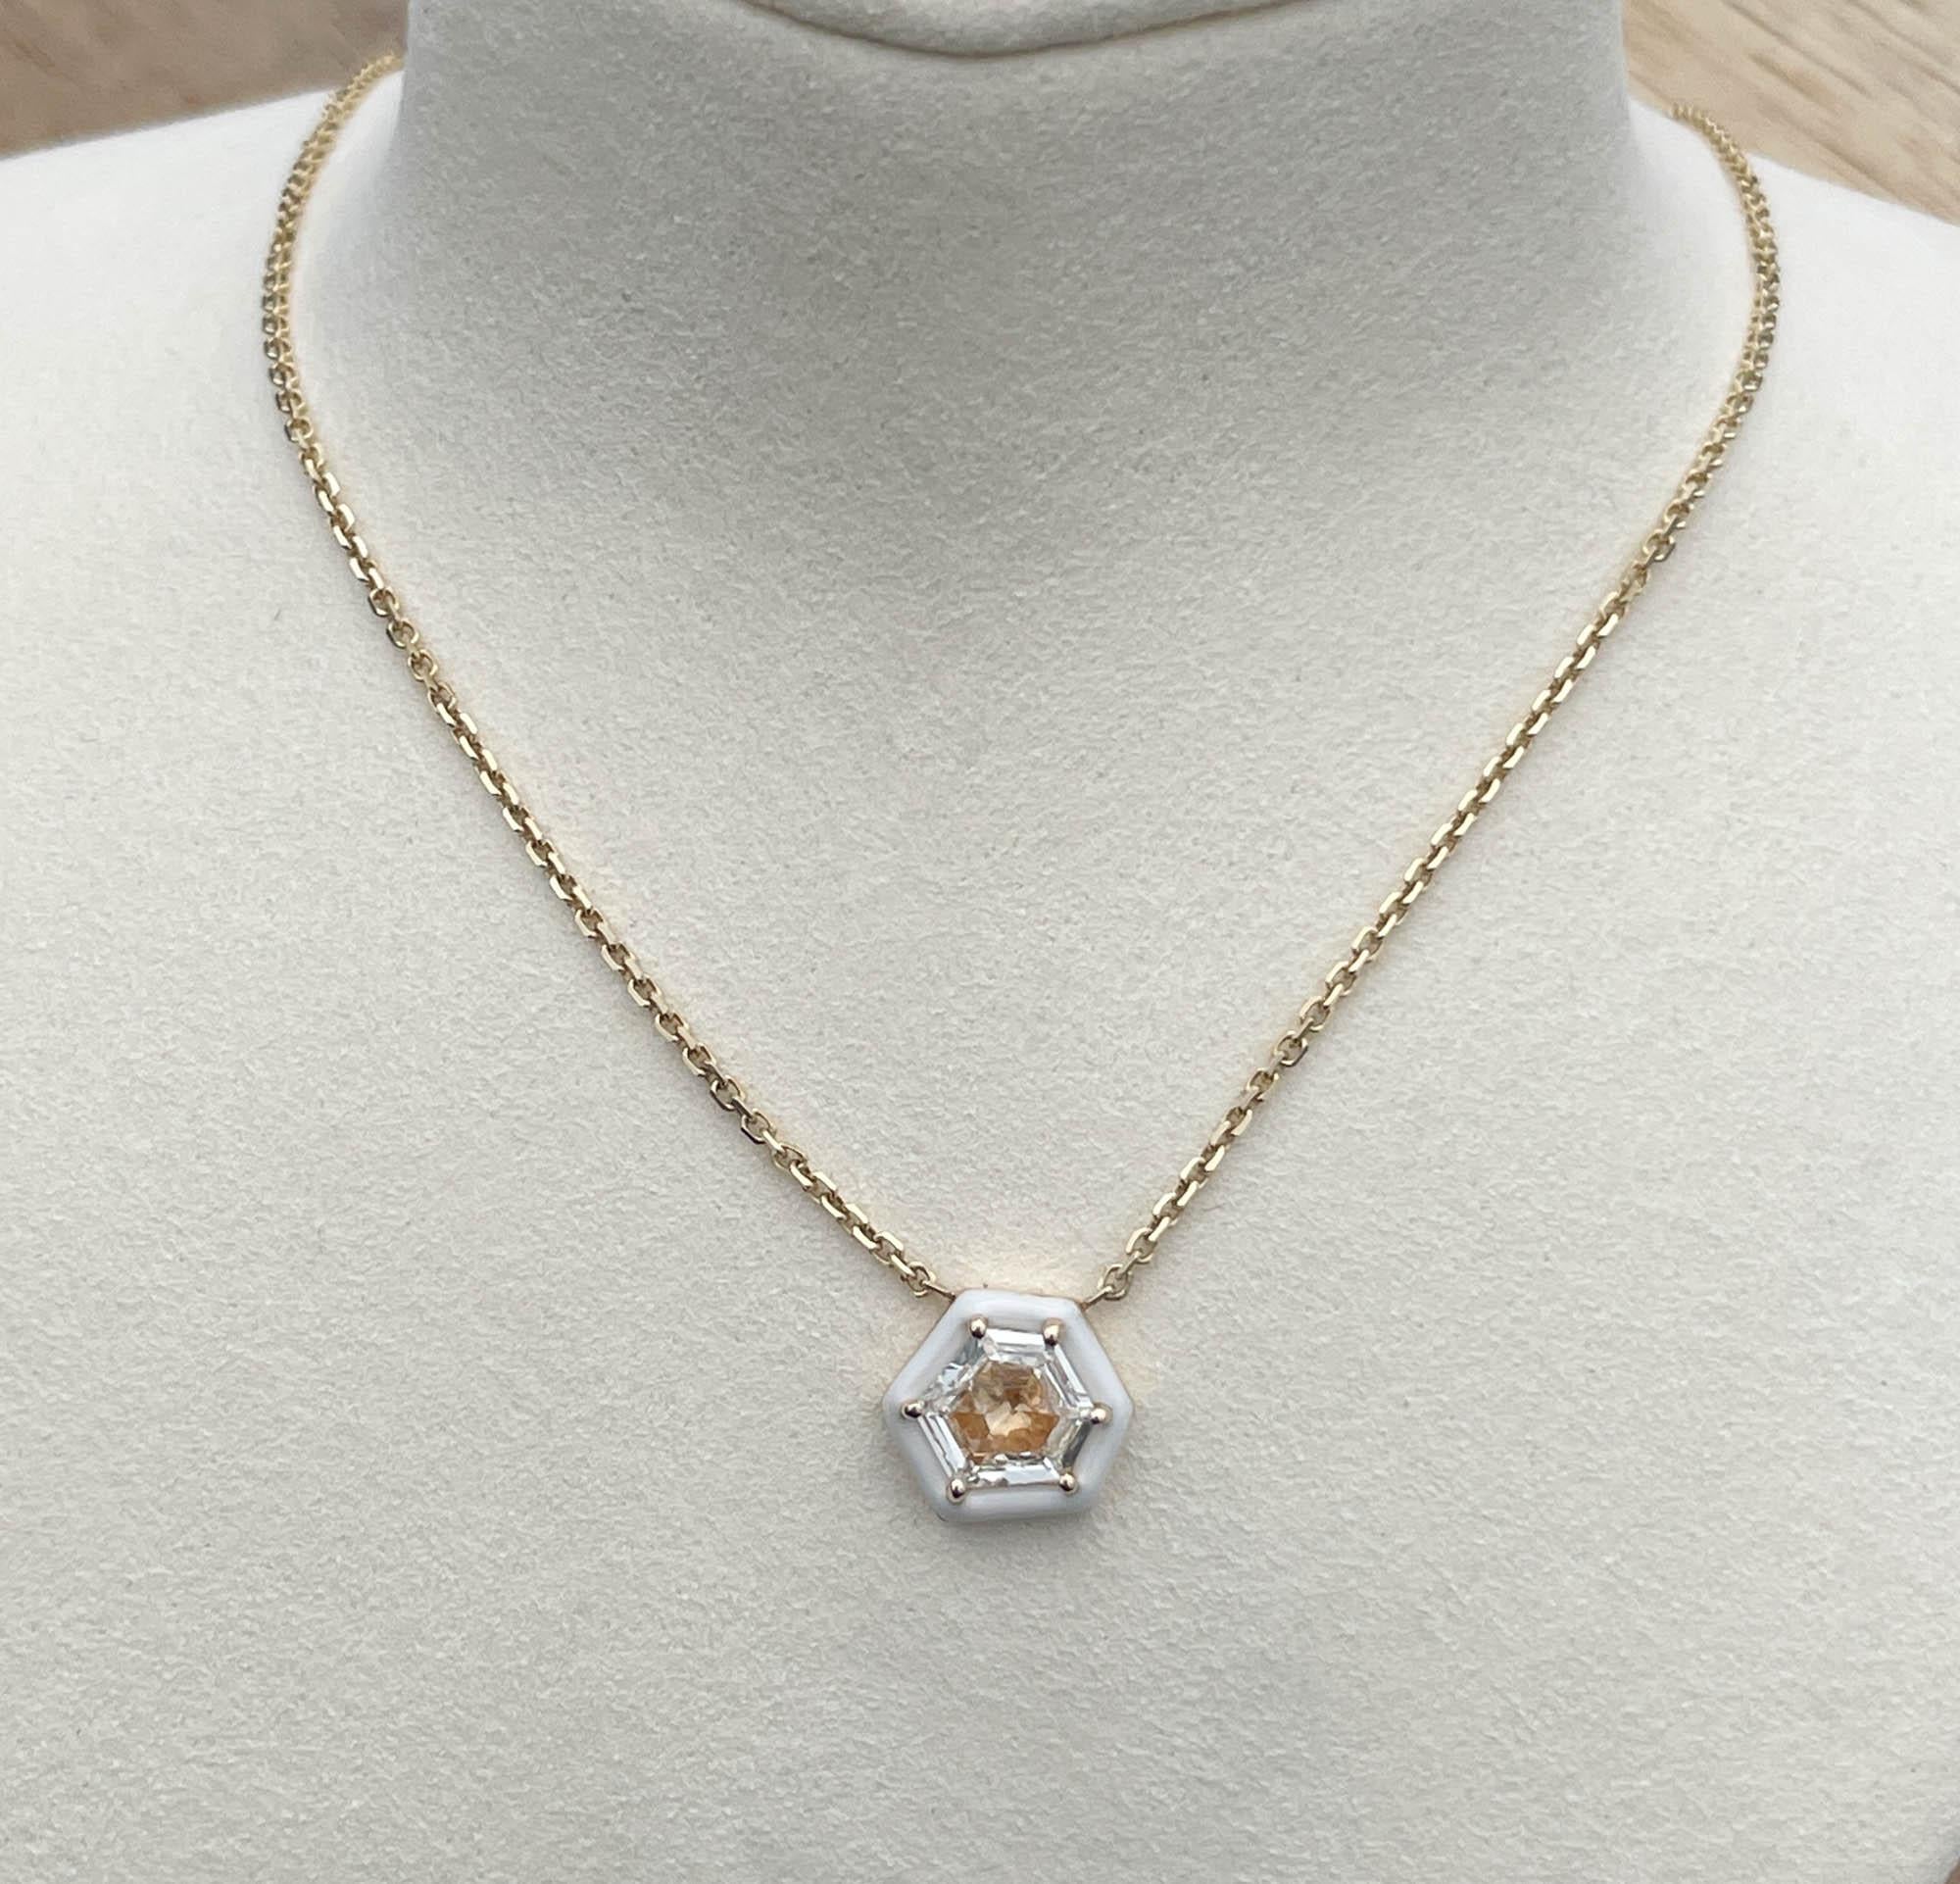 Jay Feder 14k Yellow Gold Diamond Enamel Hexagon Pendant Necklace. The misshaped hexagon diamond is approx. 1 carat.
The pendant’s measurements are 9.68x10.38mm. The necklace is 18 inches long (with bolo). The total weight of the necklace is 4.4